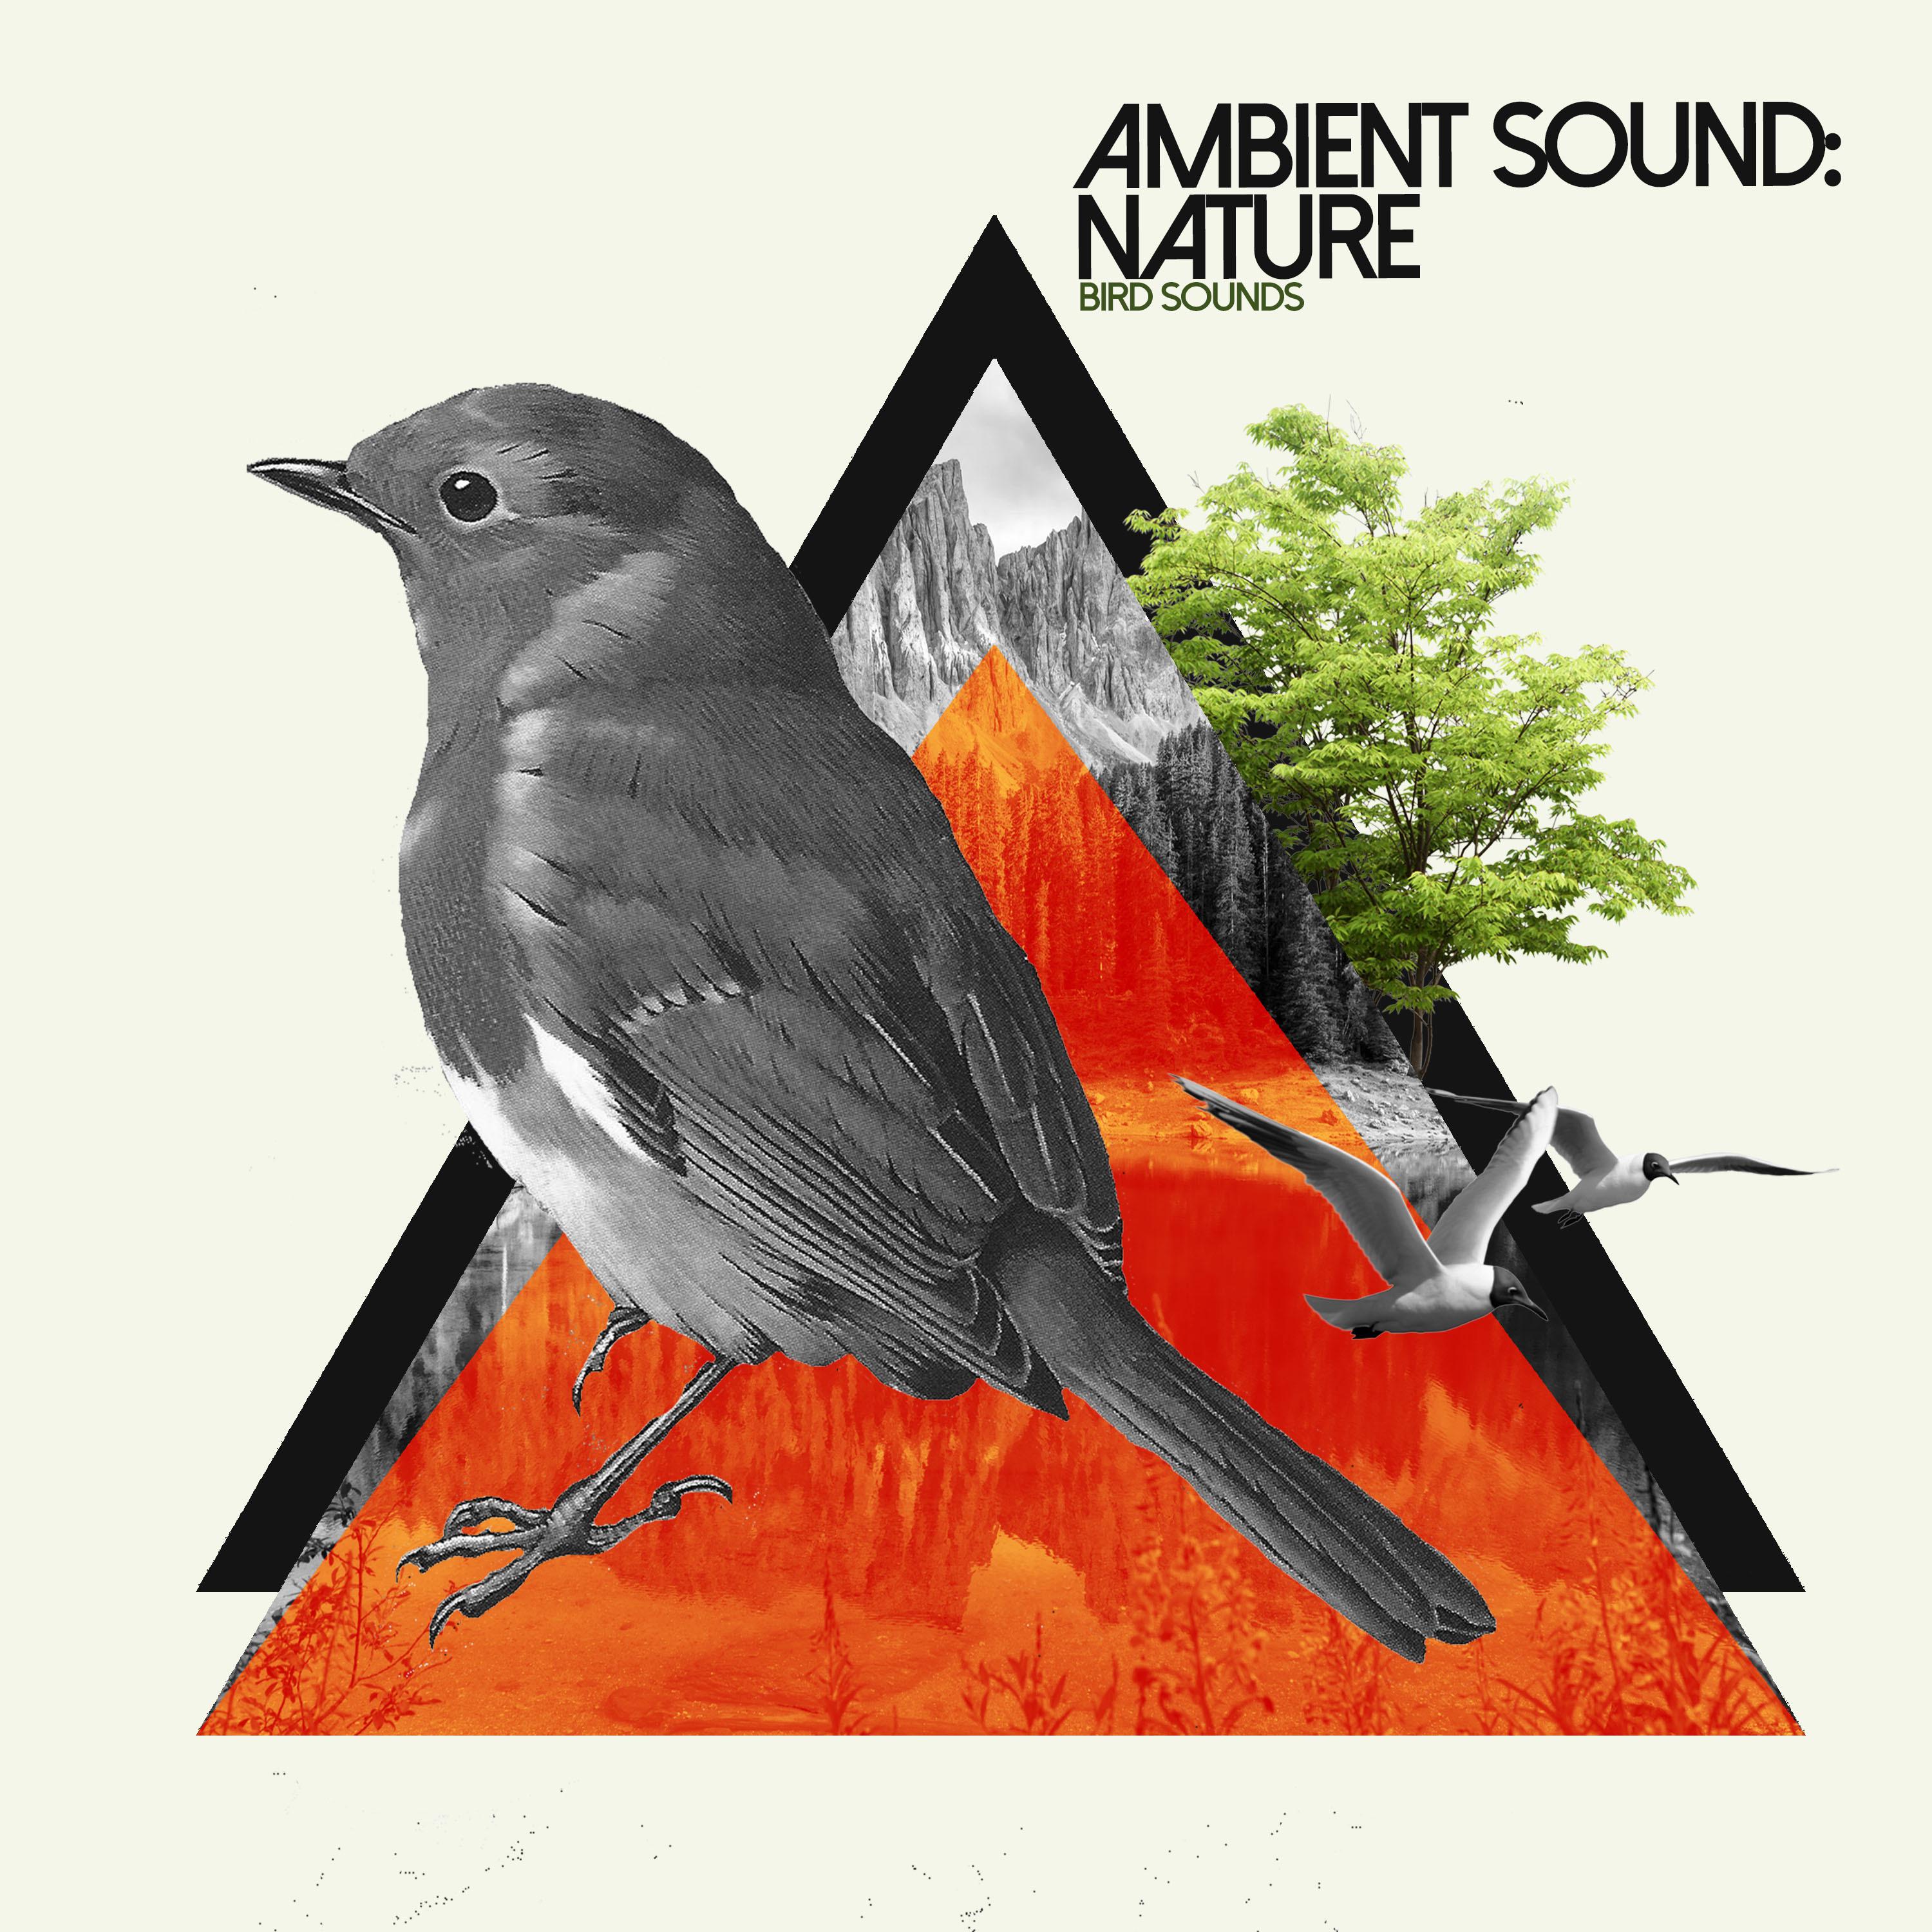 Ambient Sound: Nature